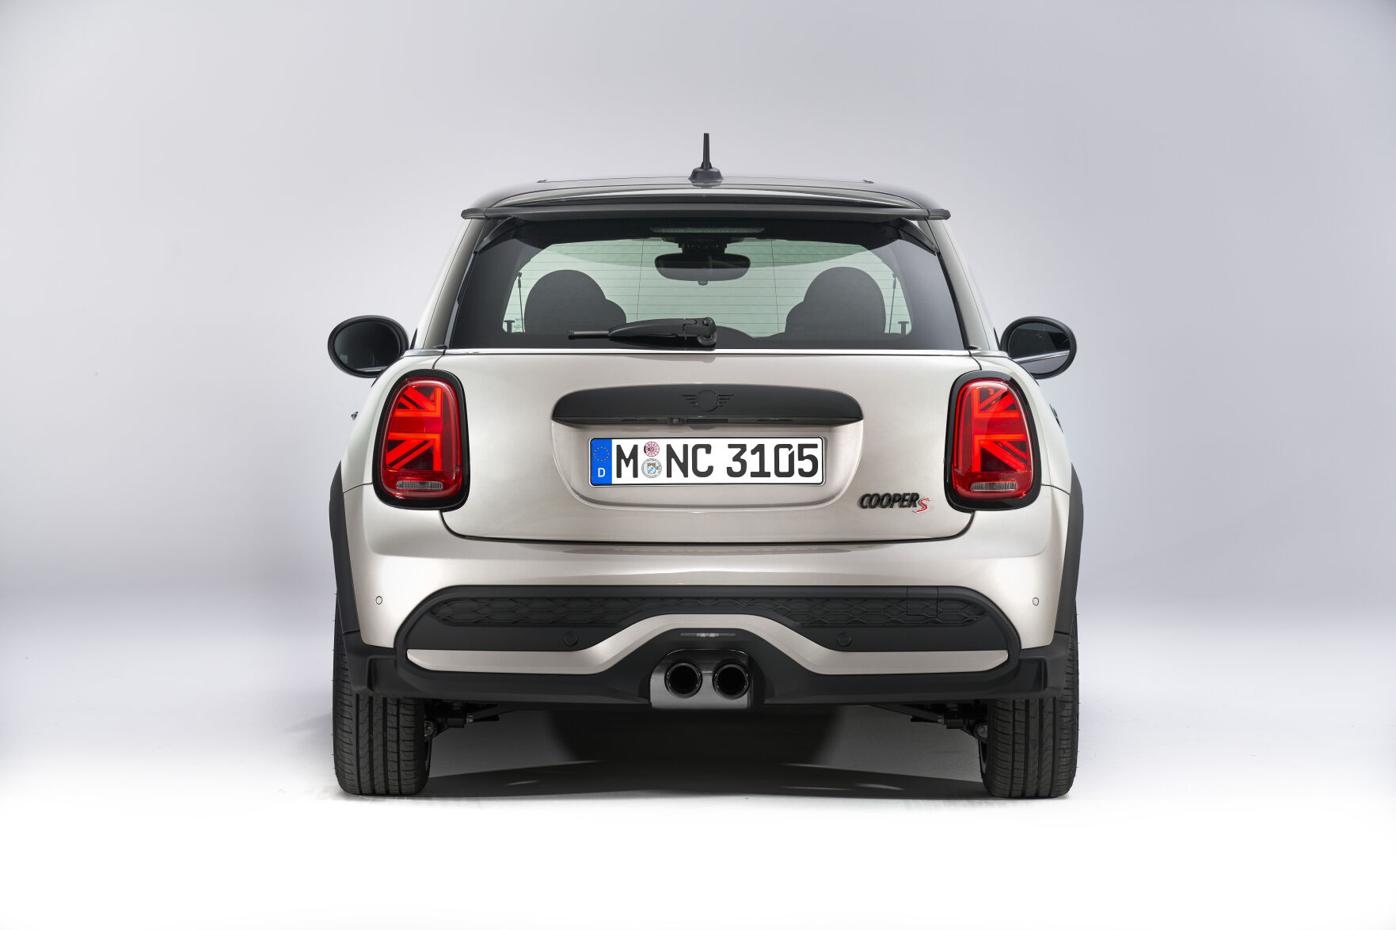 Authentic driving fun, mysterious charisma – The MINI Cooper S